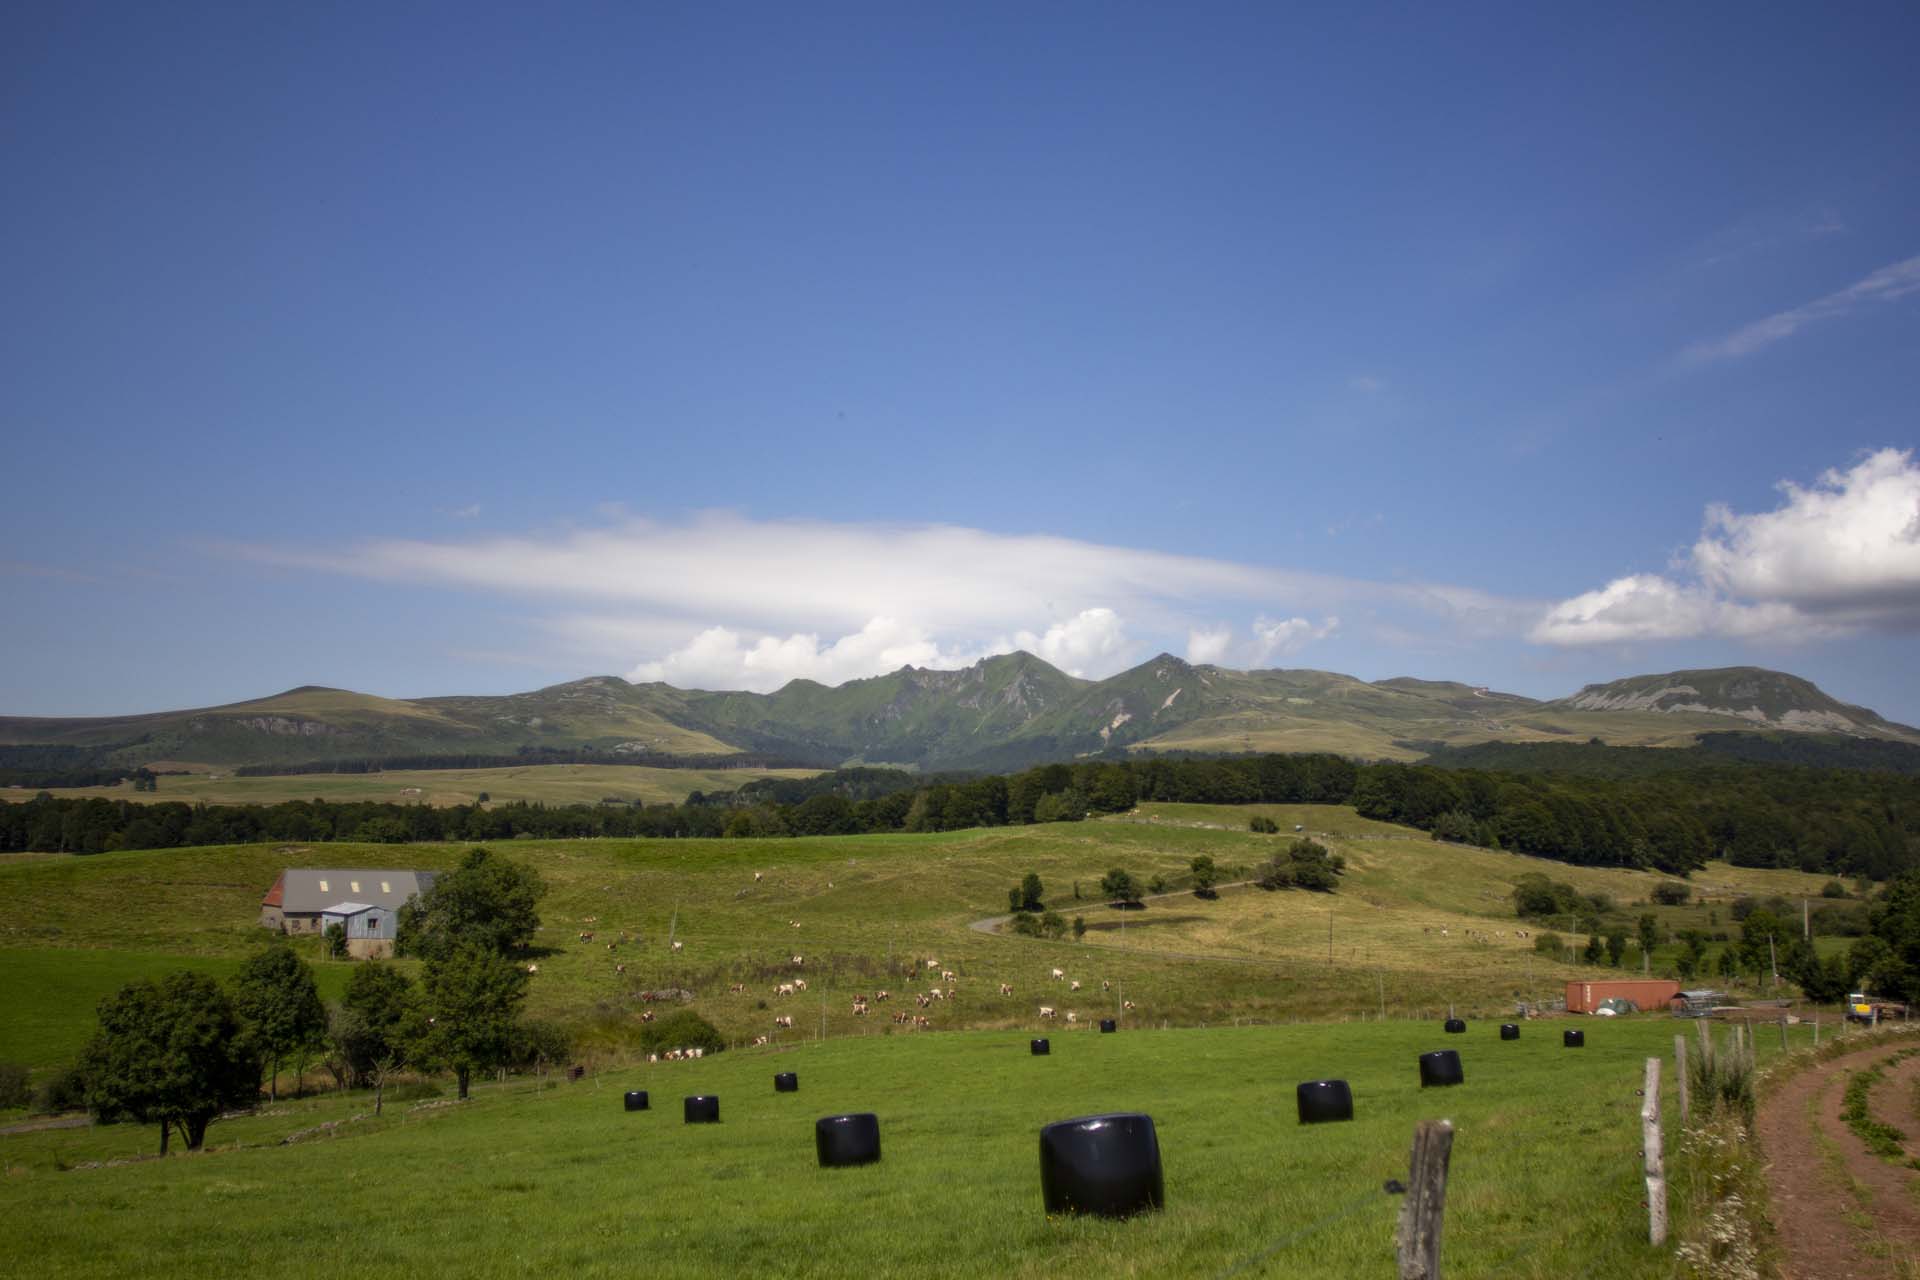 View of the Massif du Sancy from the Puy de Chareire in Picherande